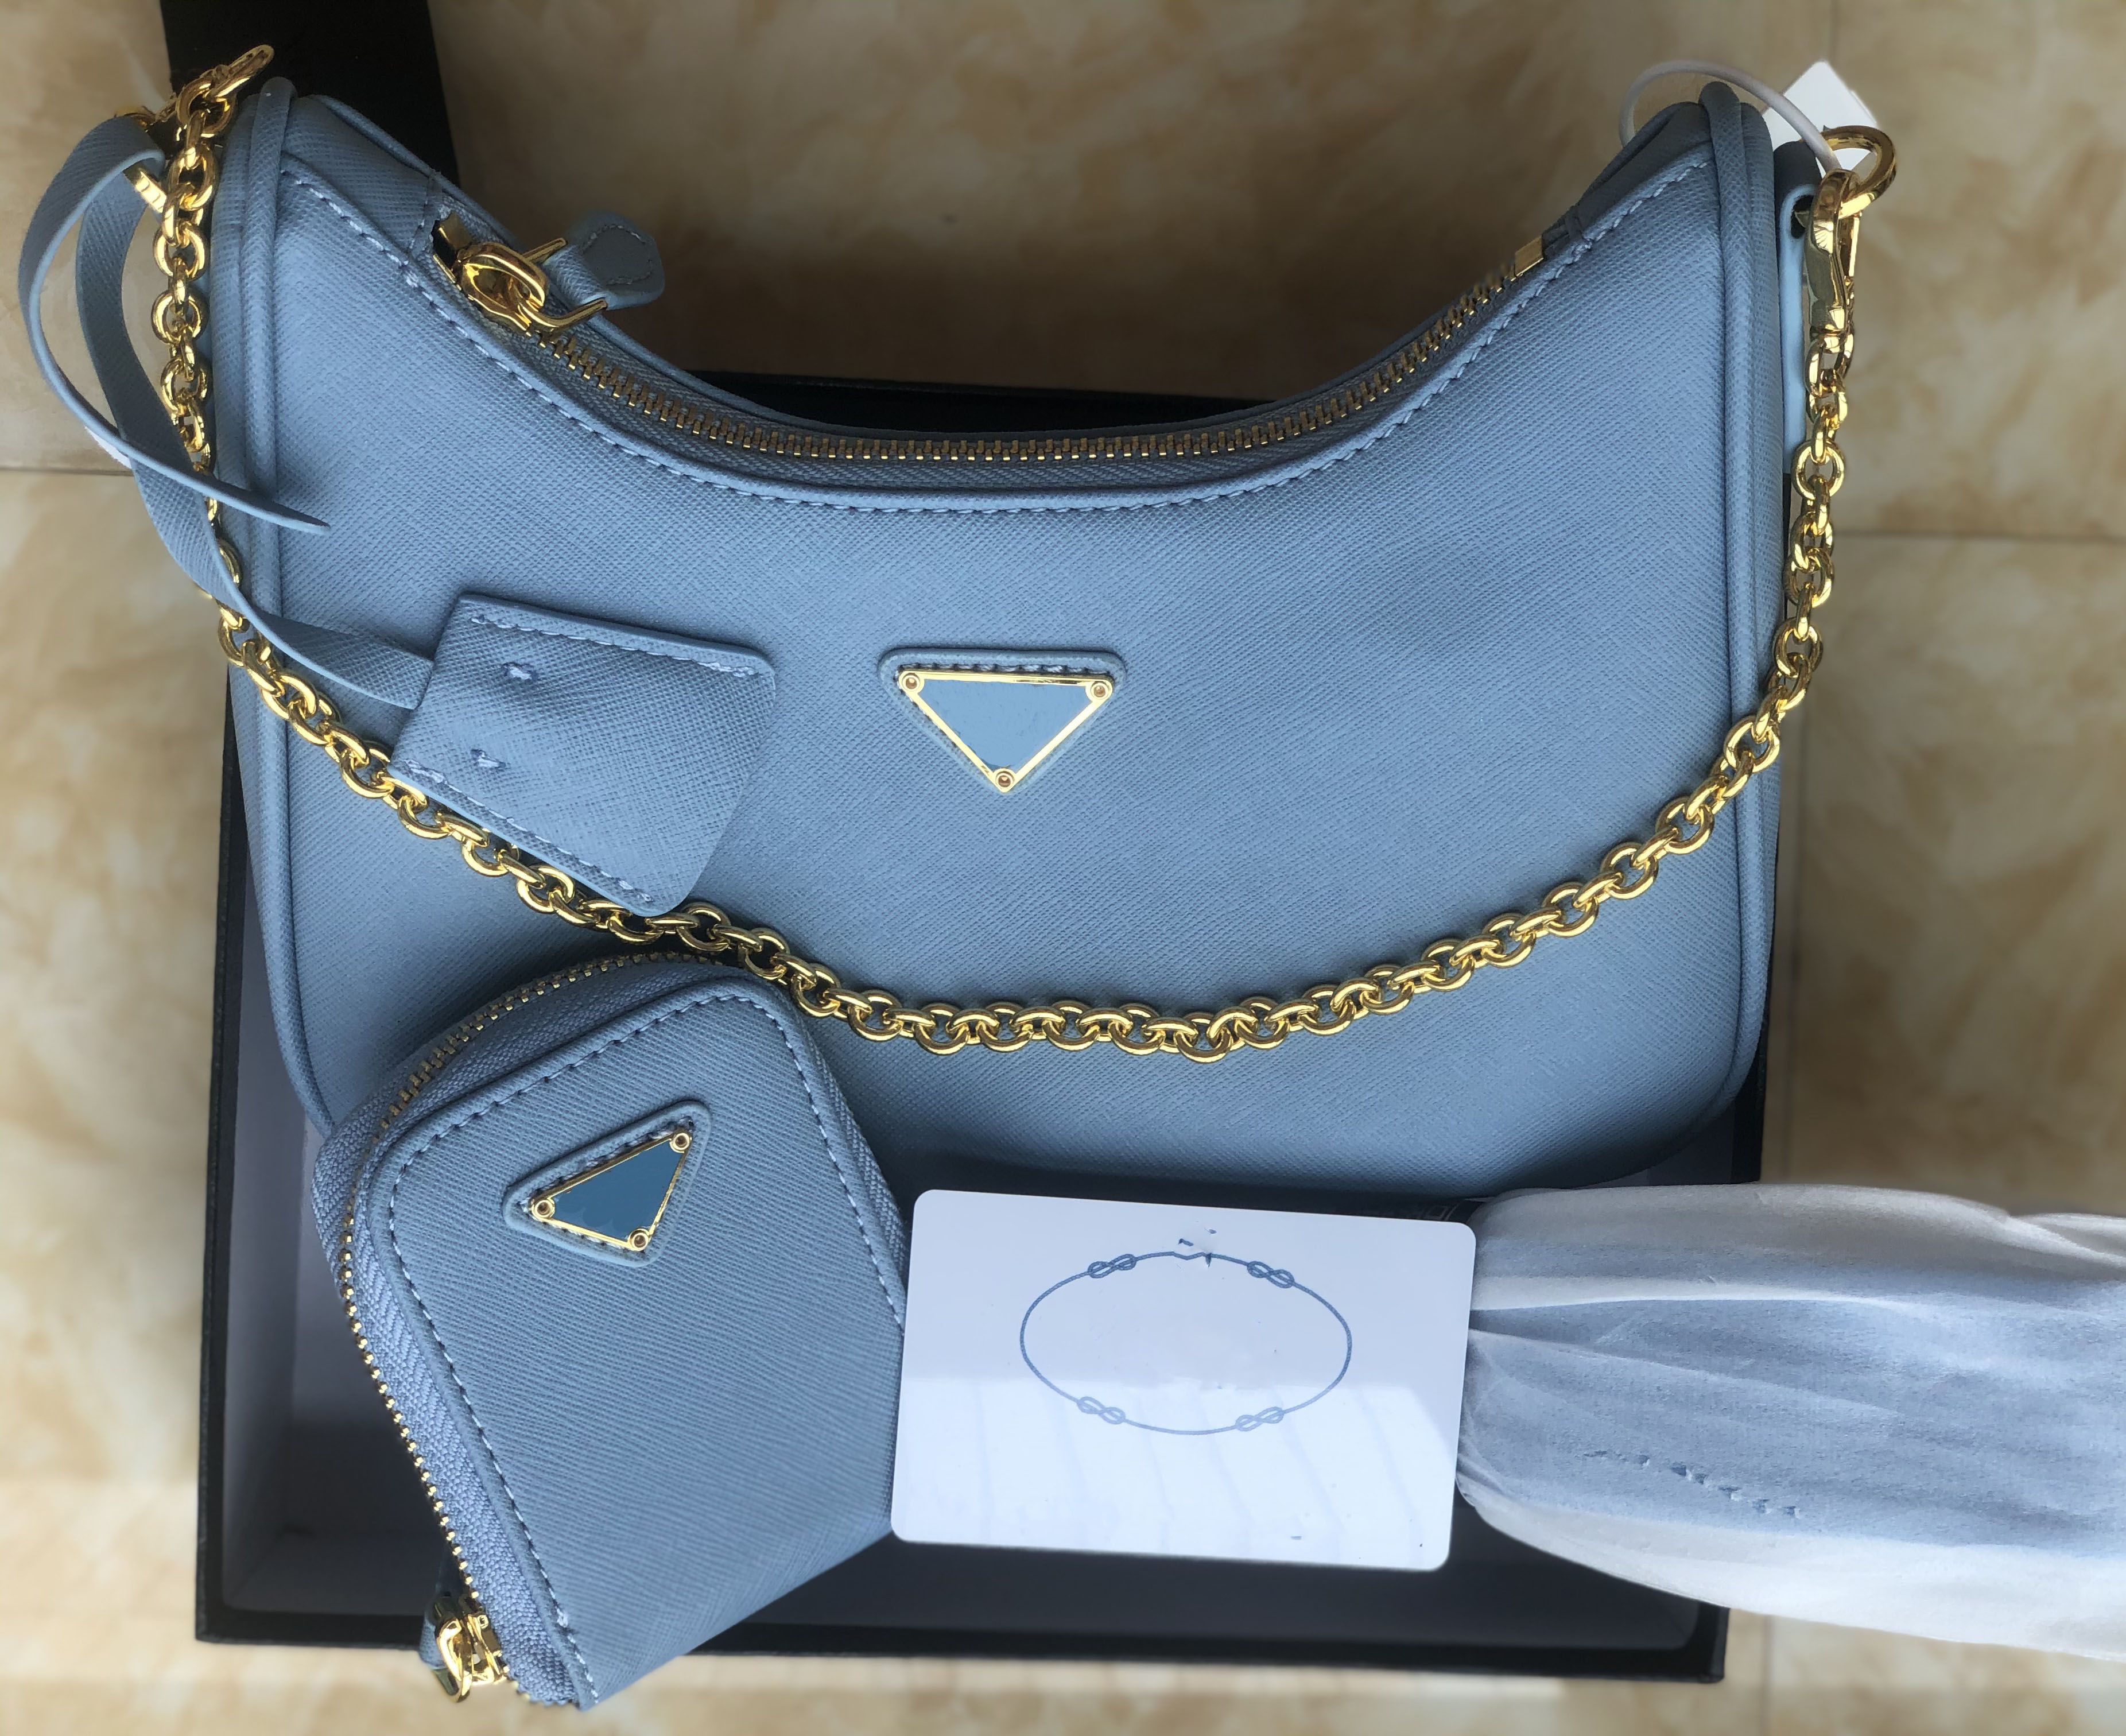 23. Lieather Blue Bags Gold Chain